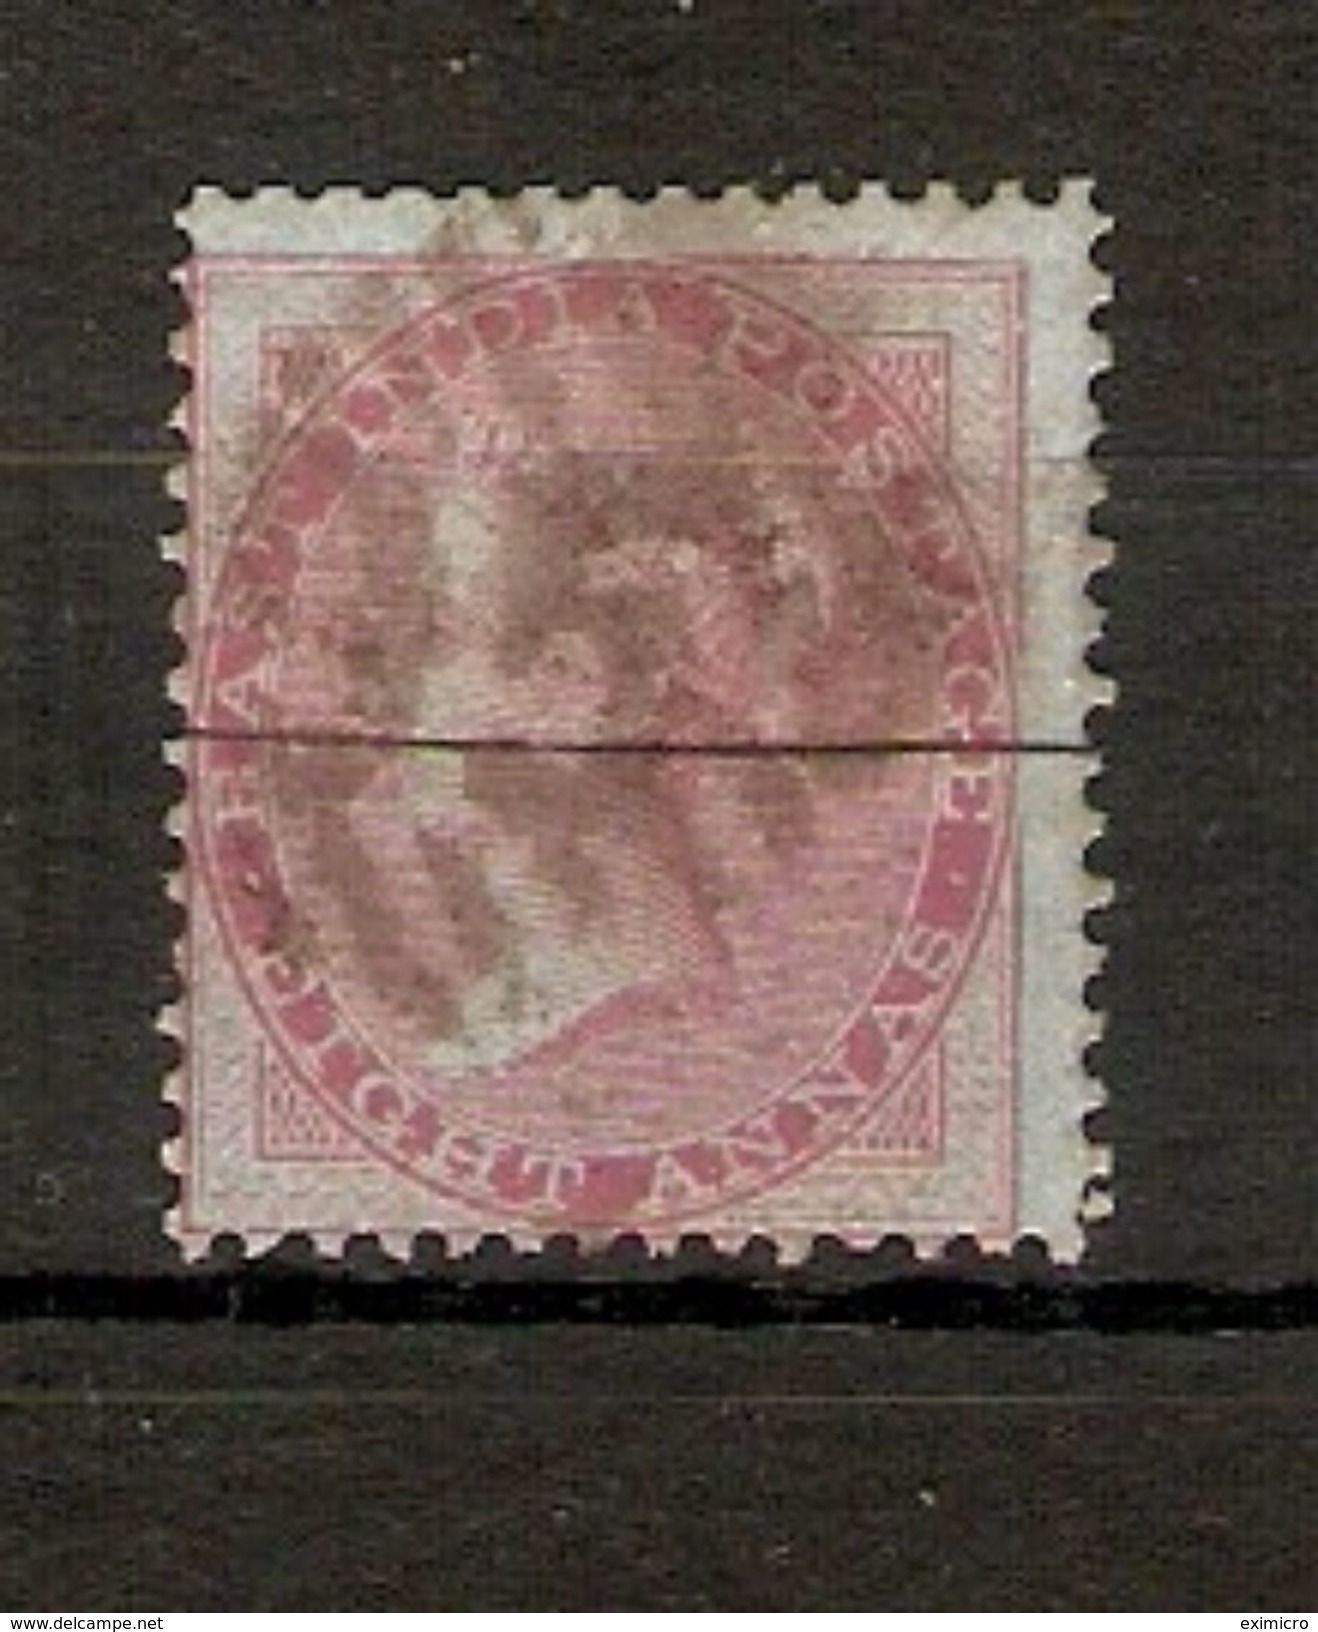 INDIA 1856 8a CARMINE SG 48 NO WATERMARK GOOD USED Cat £42 - 1854 Britse Indische Compagnie